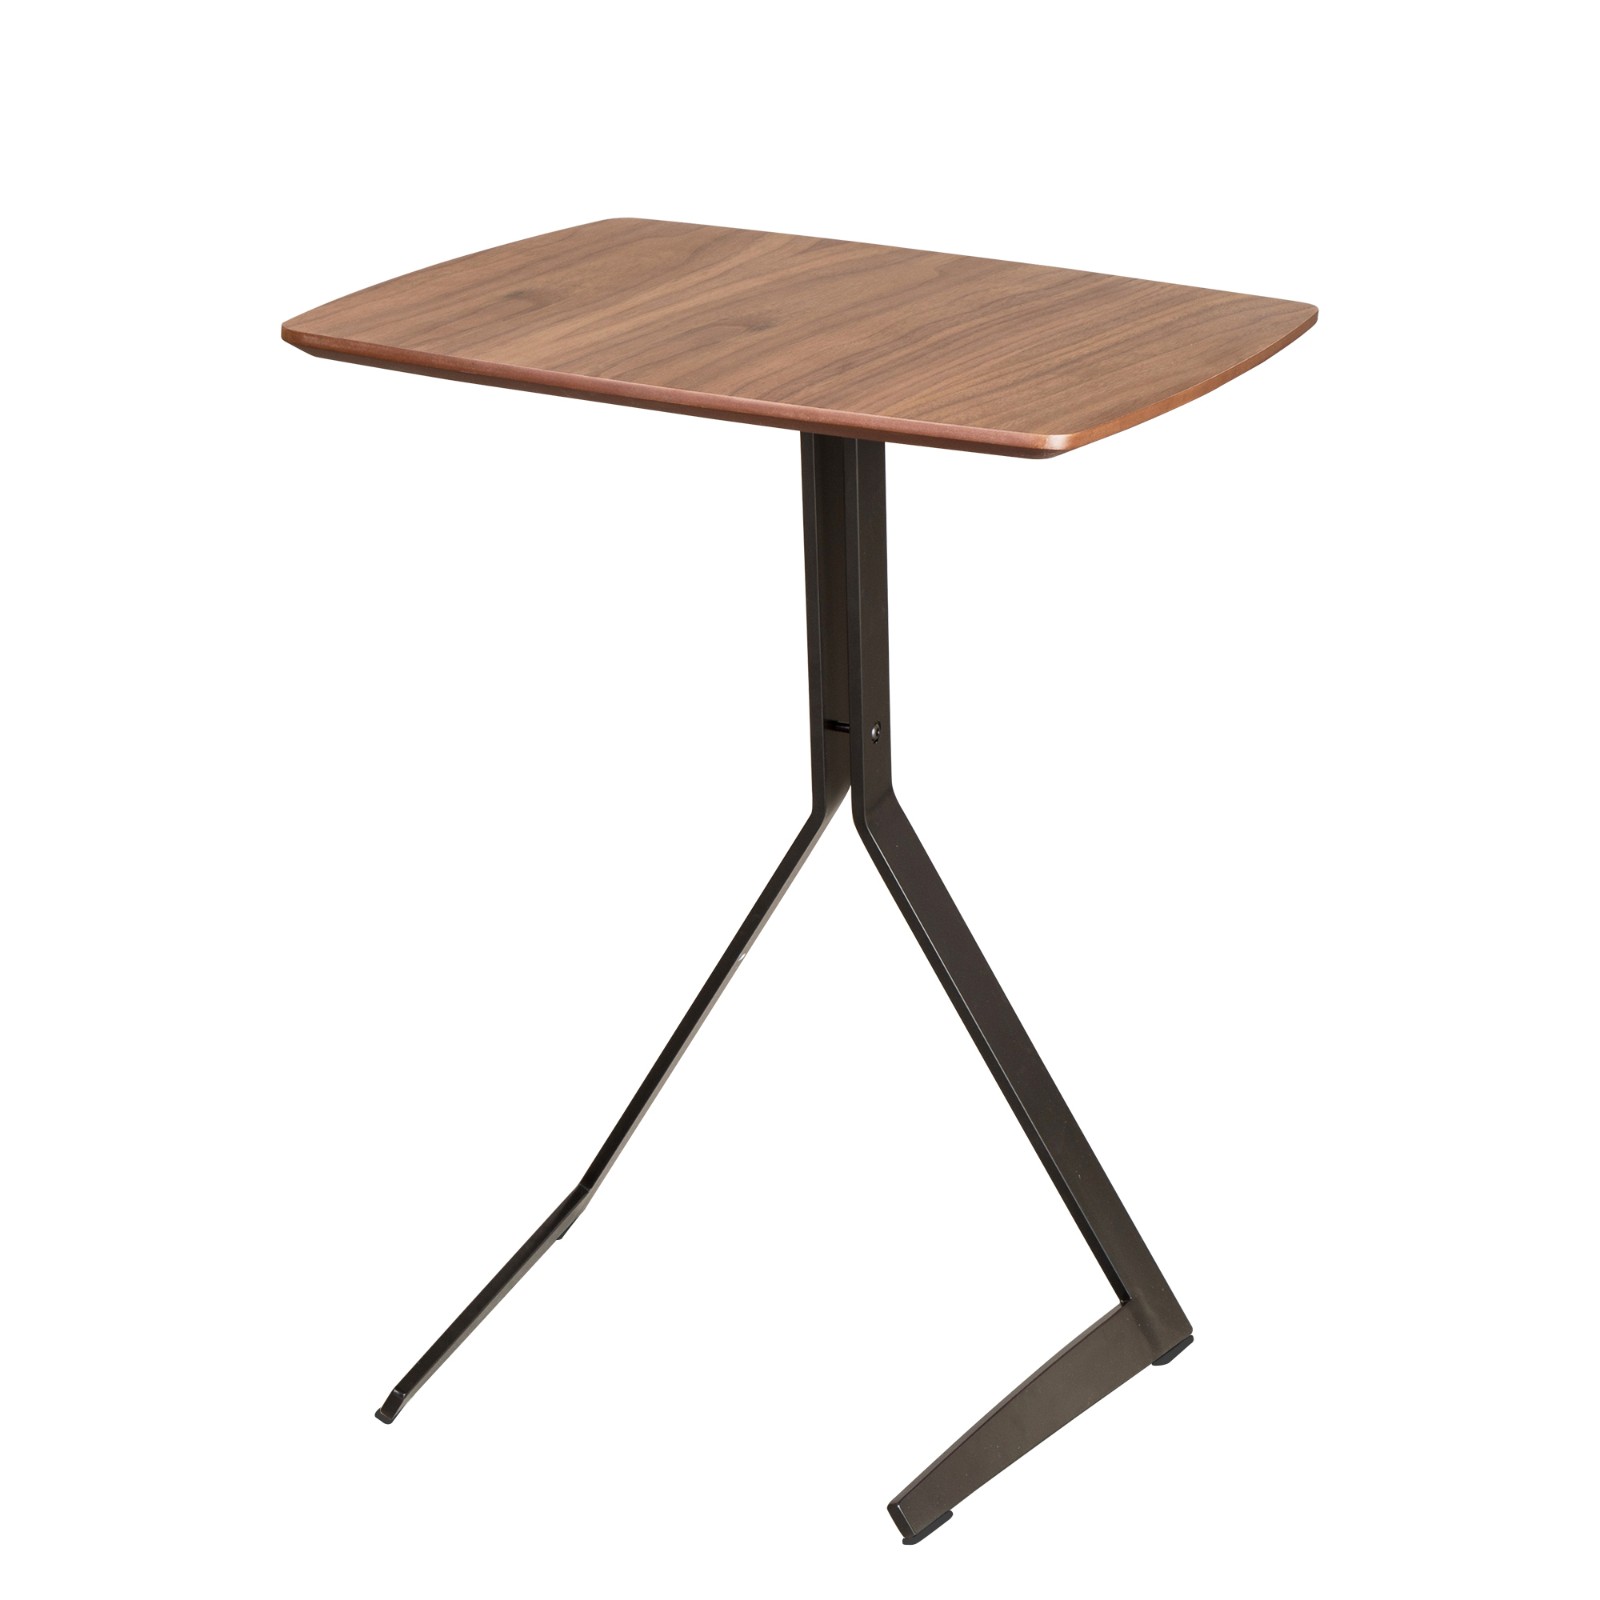 Walnut side table, black matte metal legs, disassembly and assembly